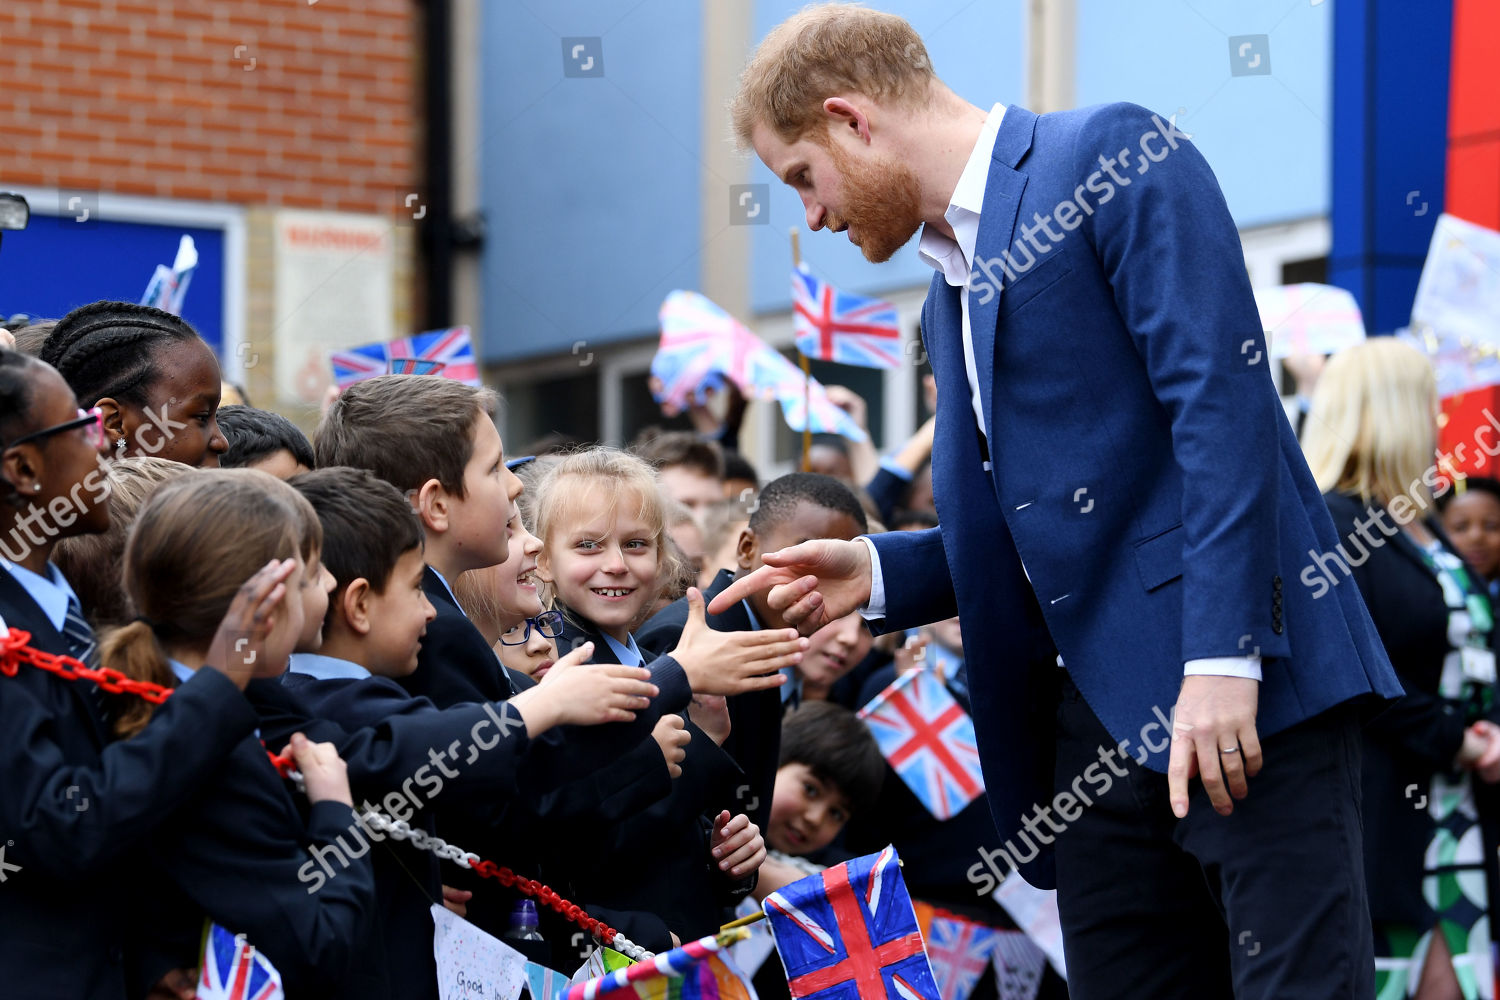 prince-harry-visits-st-vincents-catholic-primary-school-for-commonwealth-canopy-and-woodland-trust-tree-planting-ceremony-london-uk-shutterstock-editorial-10160984aj.jpg